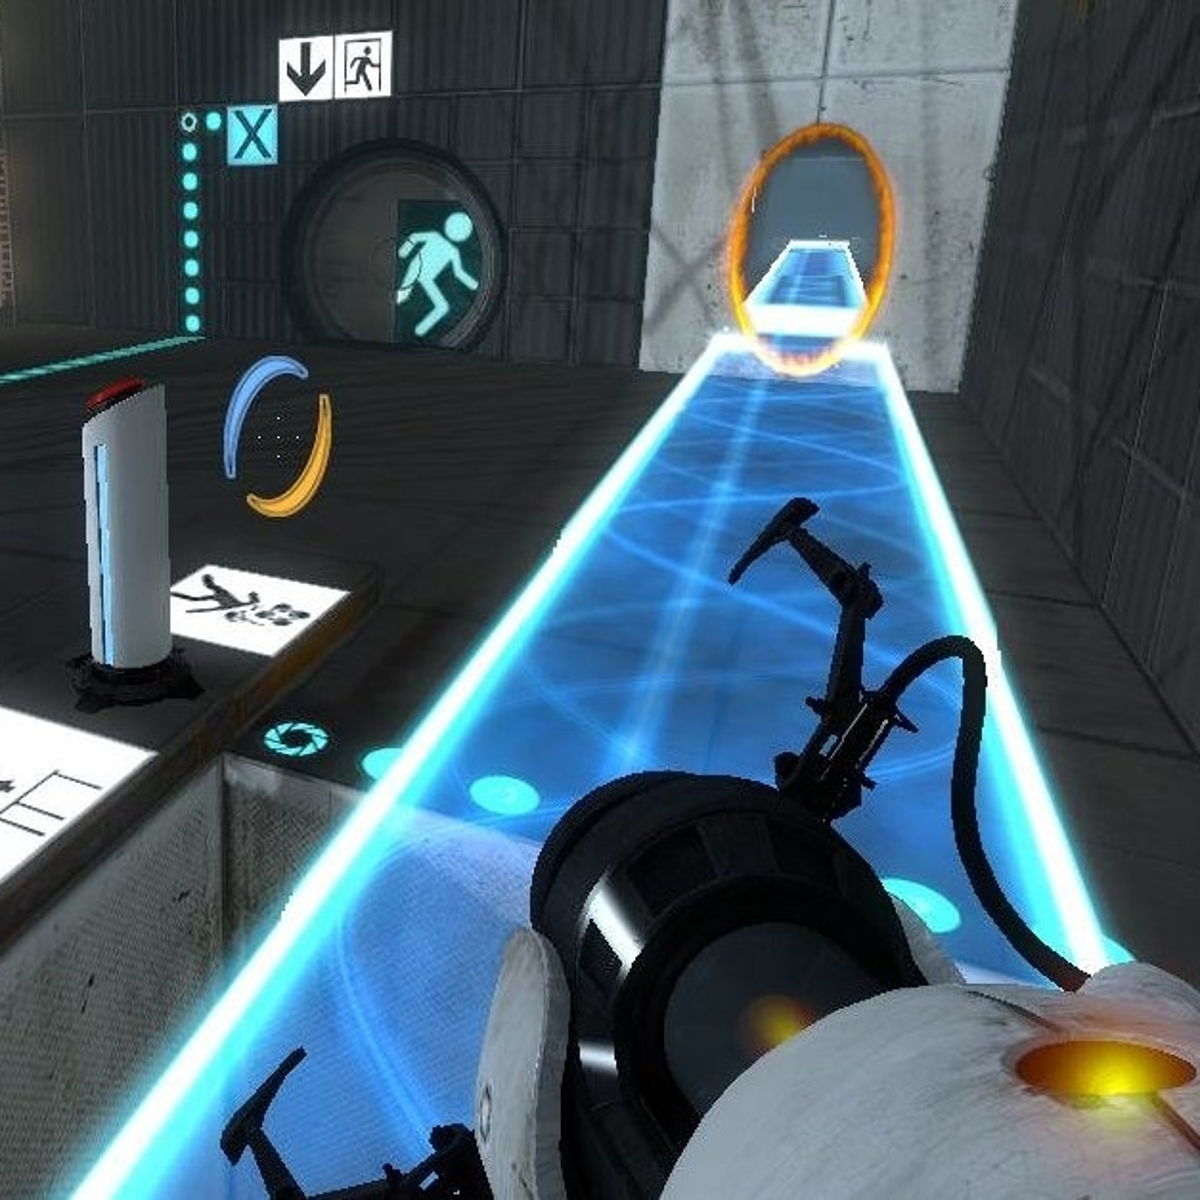 Portal 2 improves brain training more than software designed for that, says  science